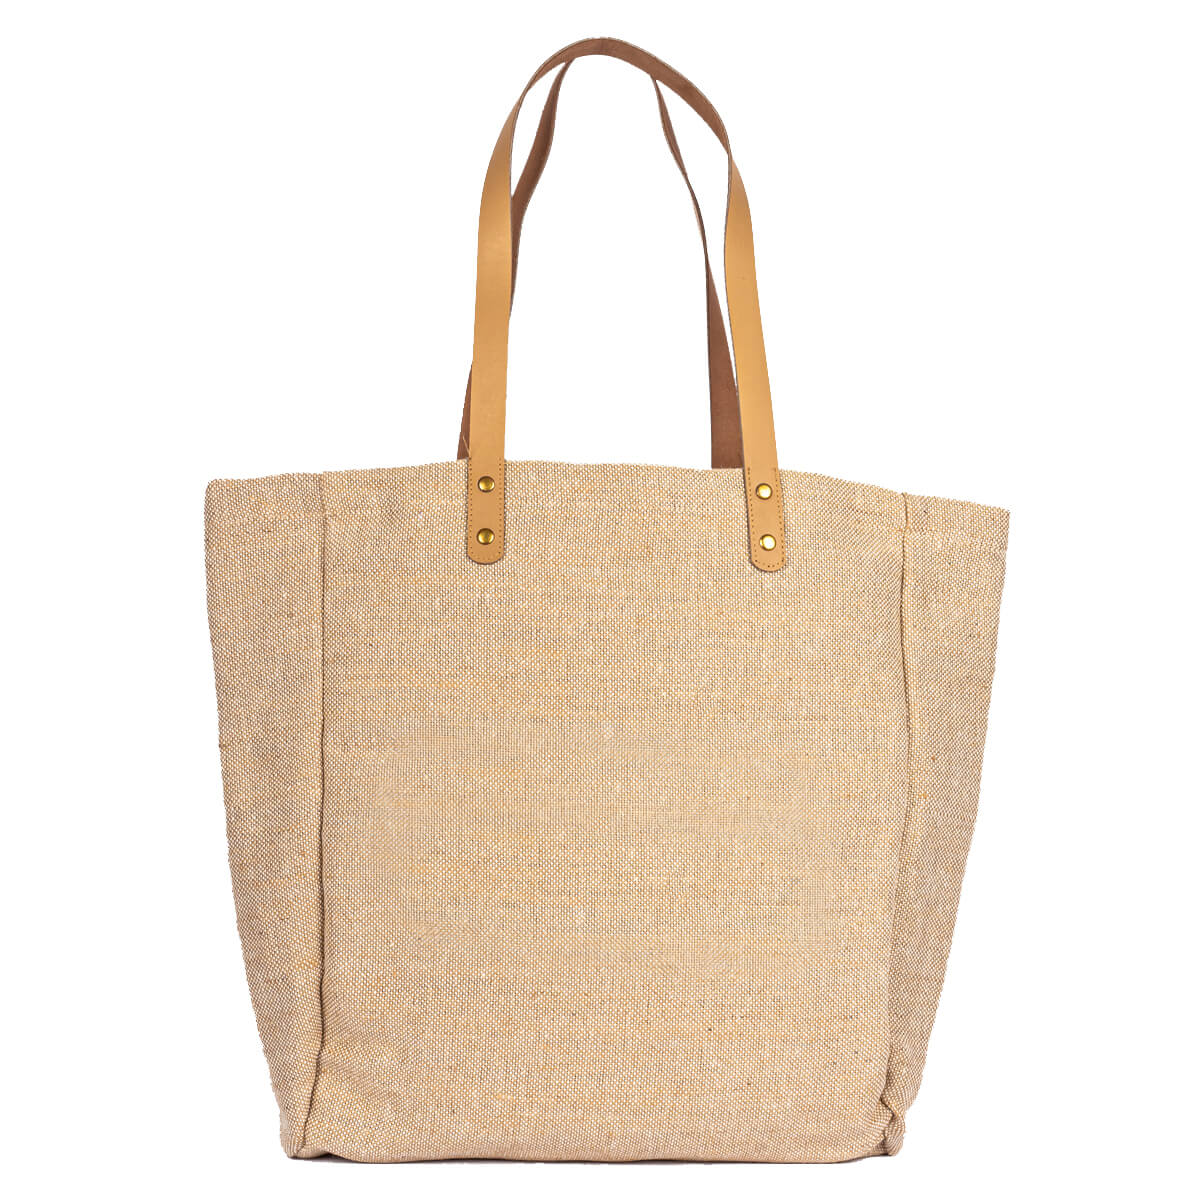 Jute Bags, Juco Bags, Cotton Bags, Canvas Bags | Shopping tote bags in UAE